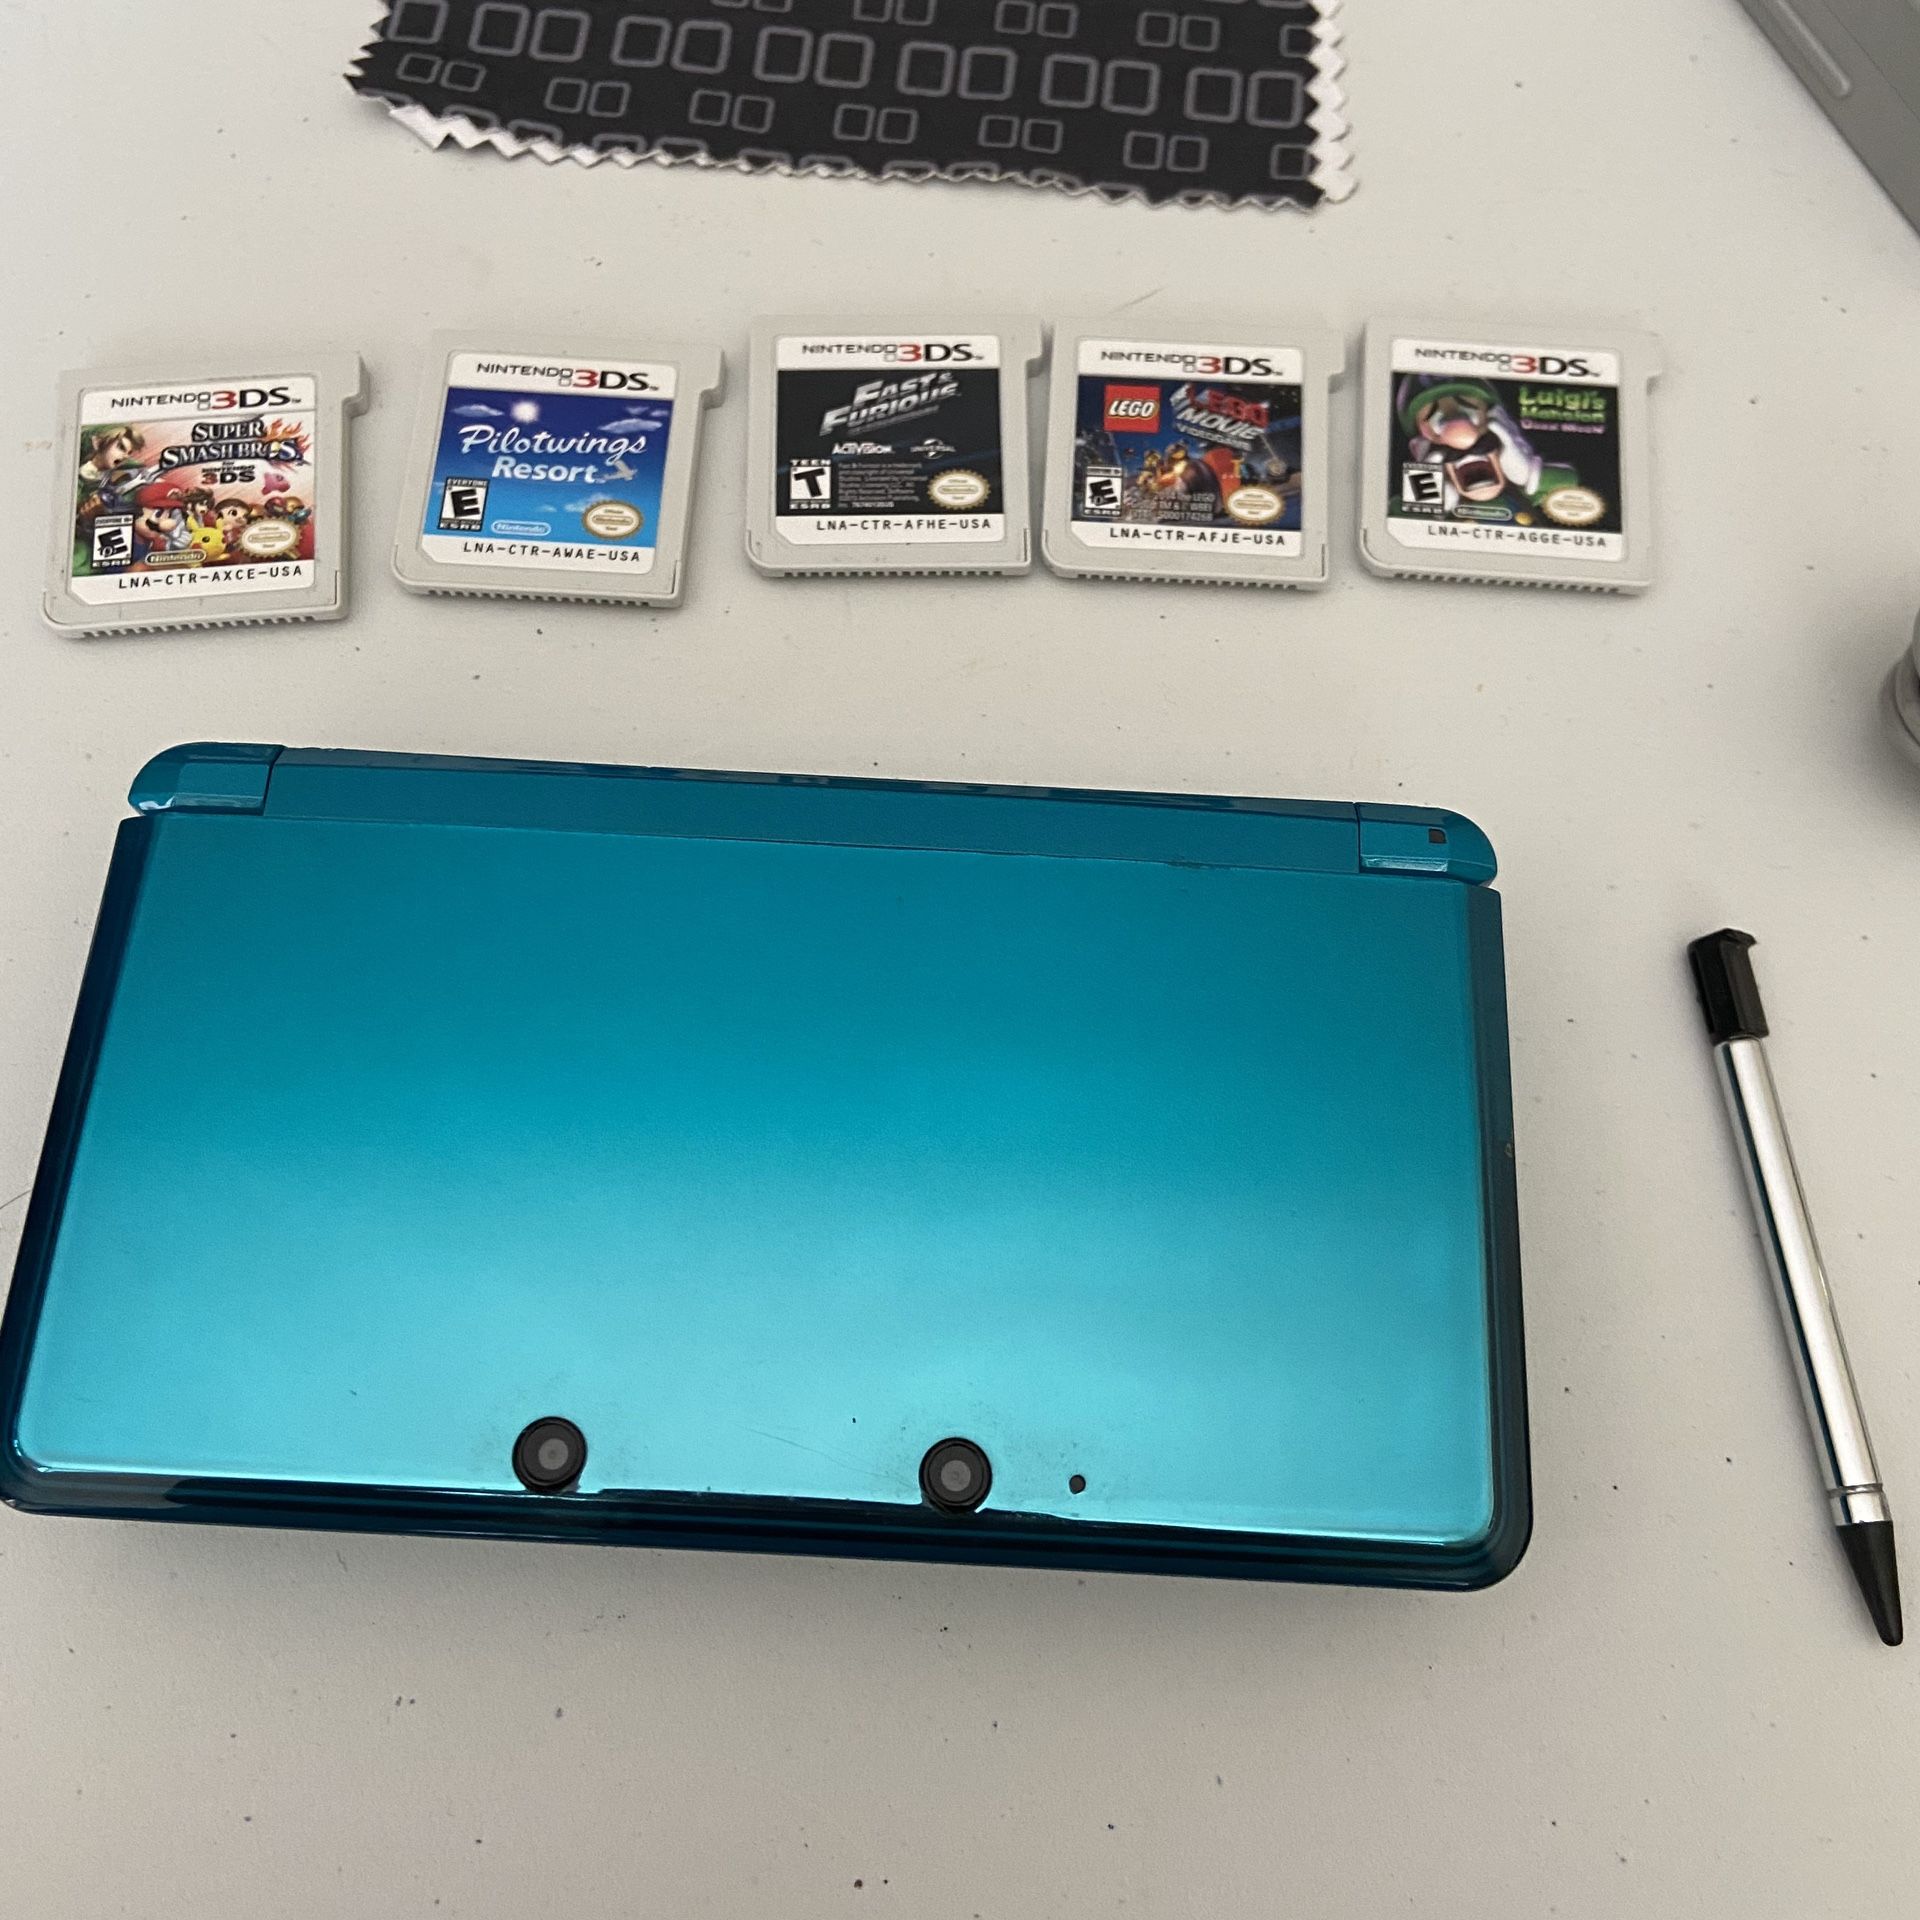 Nintendo 3DS console with games